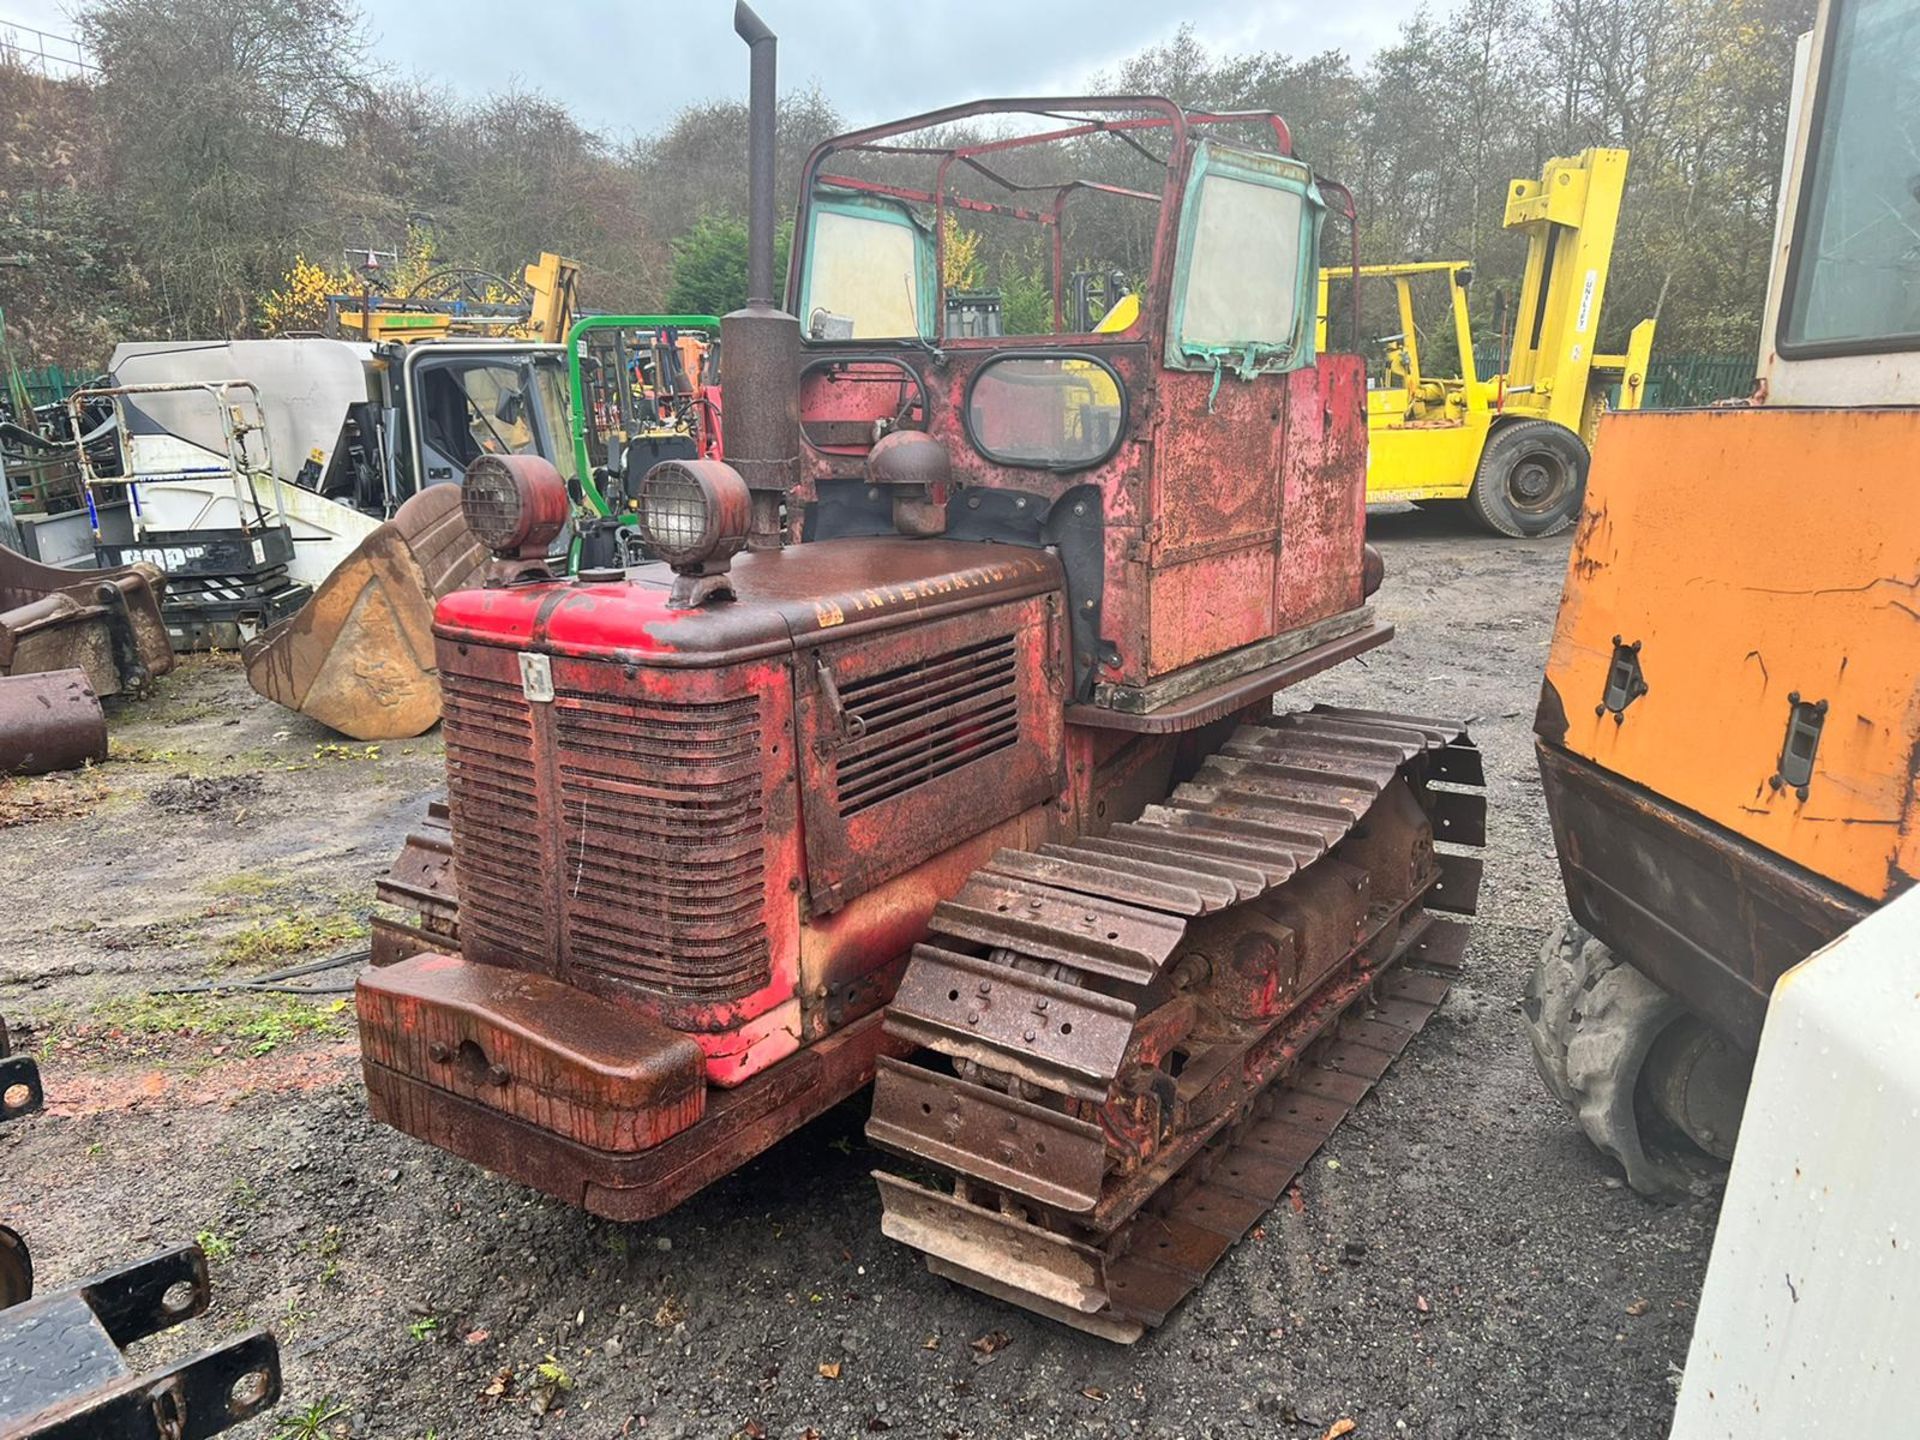 1955 INTERNATIONAL BTD6 39hp DIESEL TRACKED CRAWLER TRACTOR, RUNS AND DRIVES *PLUS VAT* - Image 5 of 11